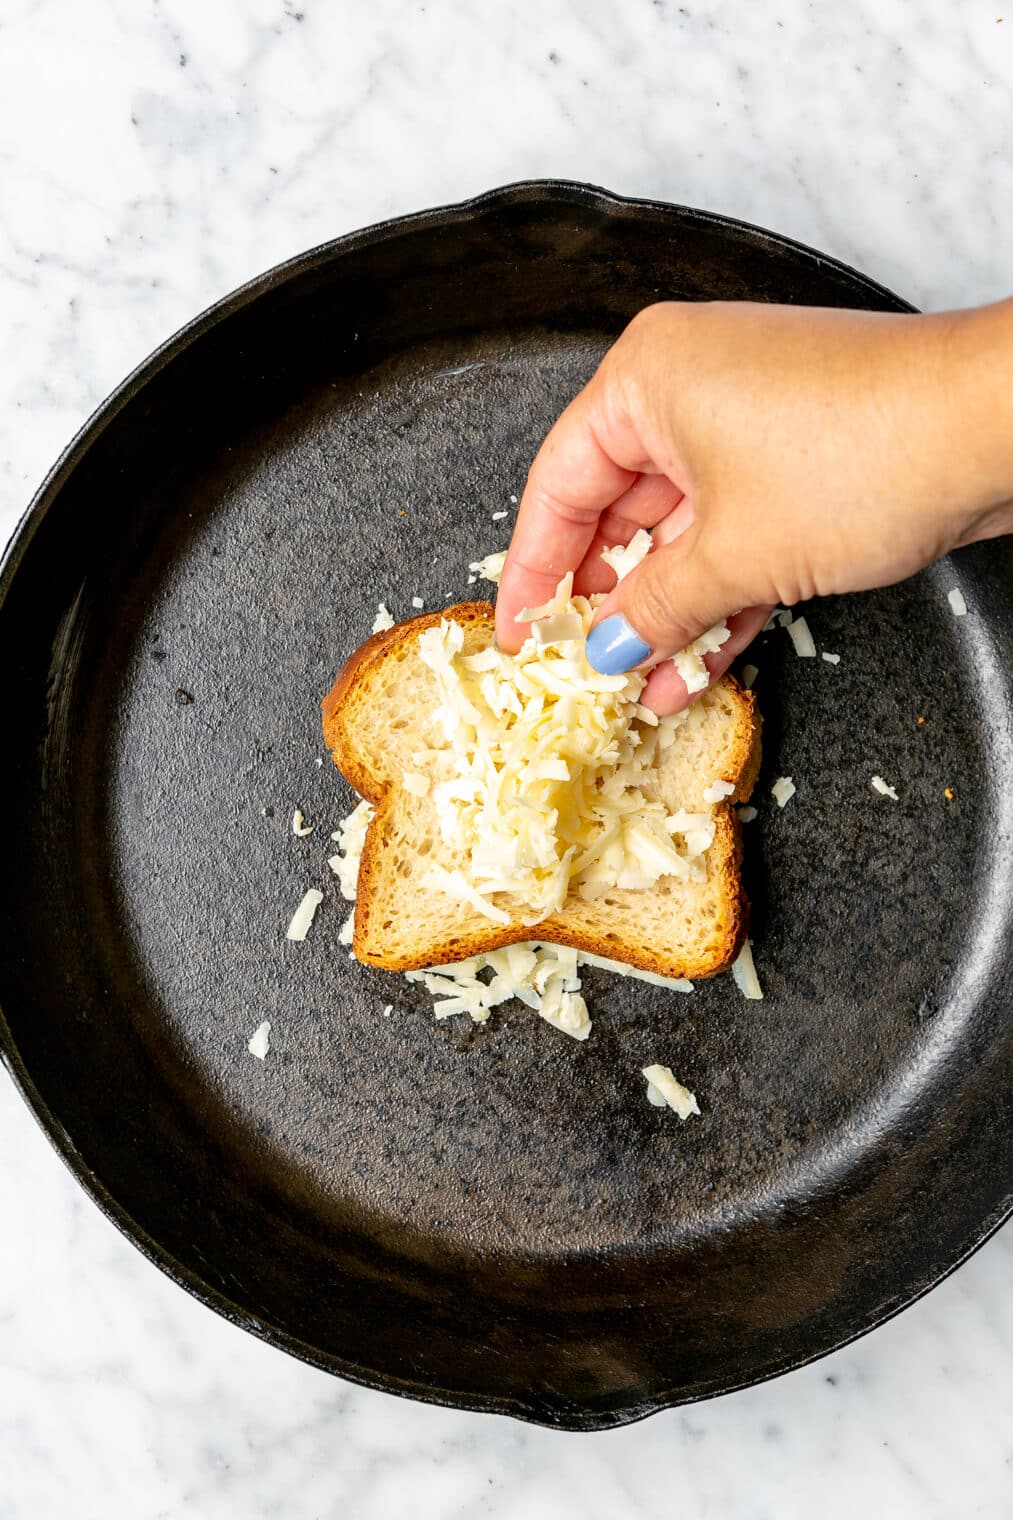 Hand sprinkling cheese on top of a slice of bread in a cast iron pan.